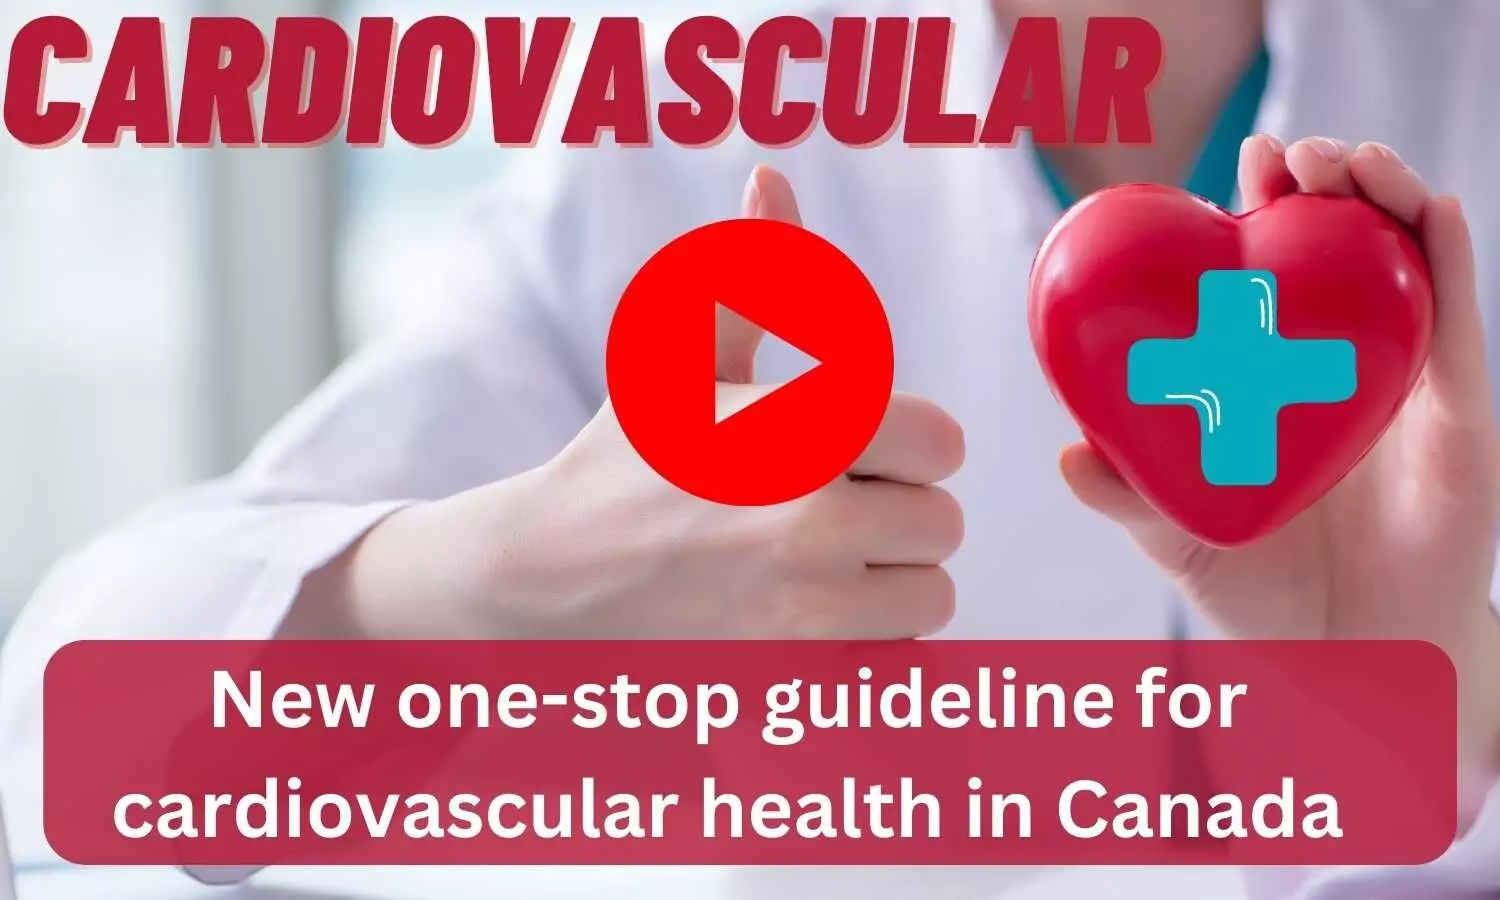 New one-stop guideline for cardiovascular health in Canada